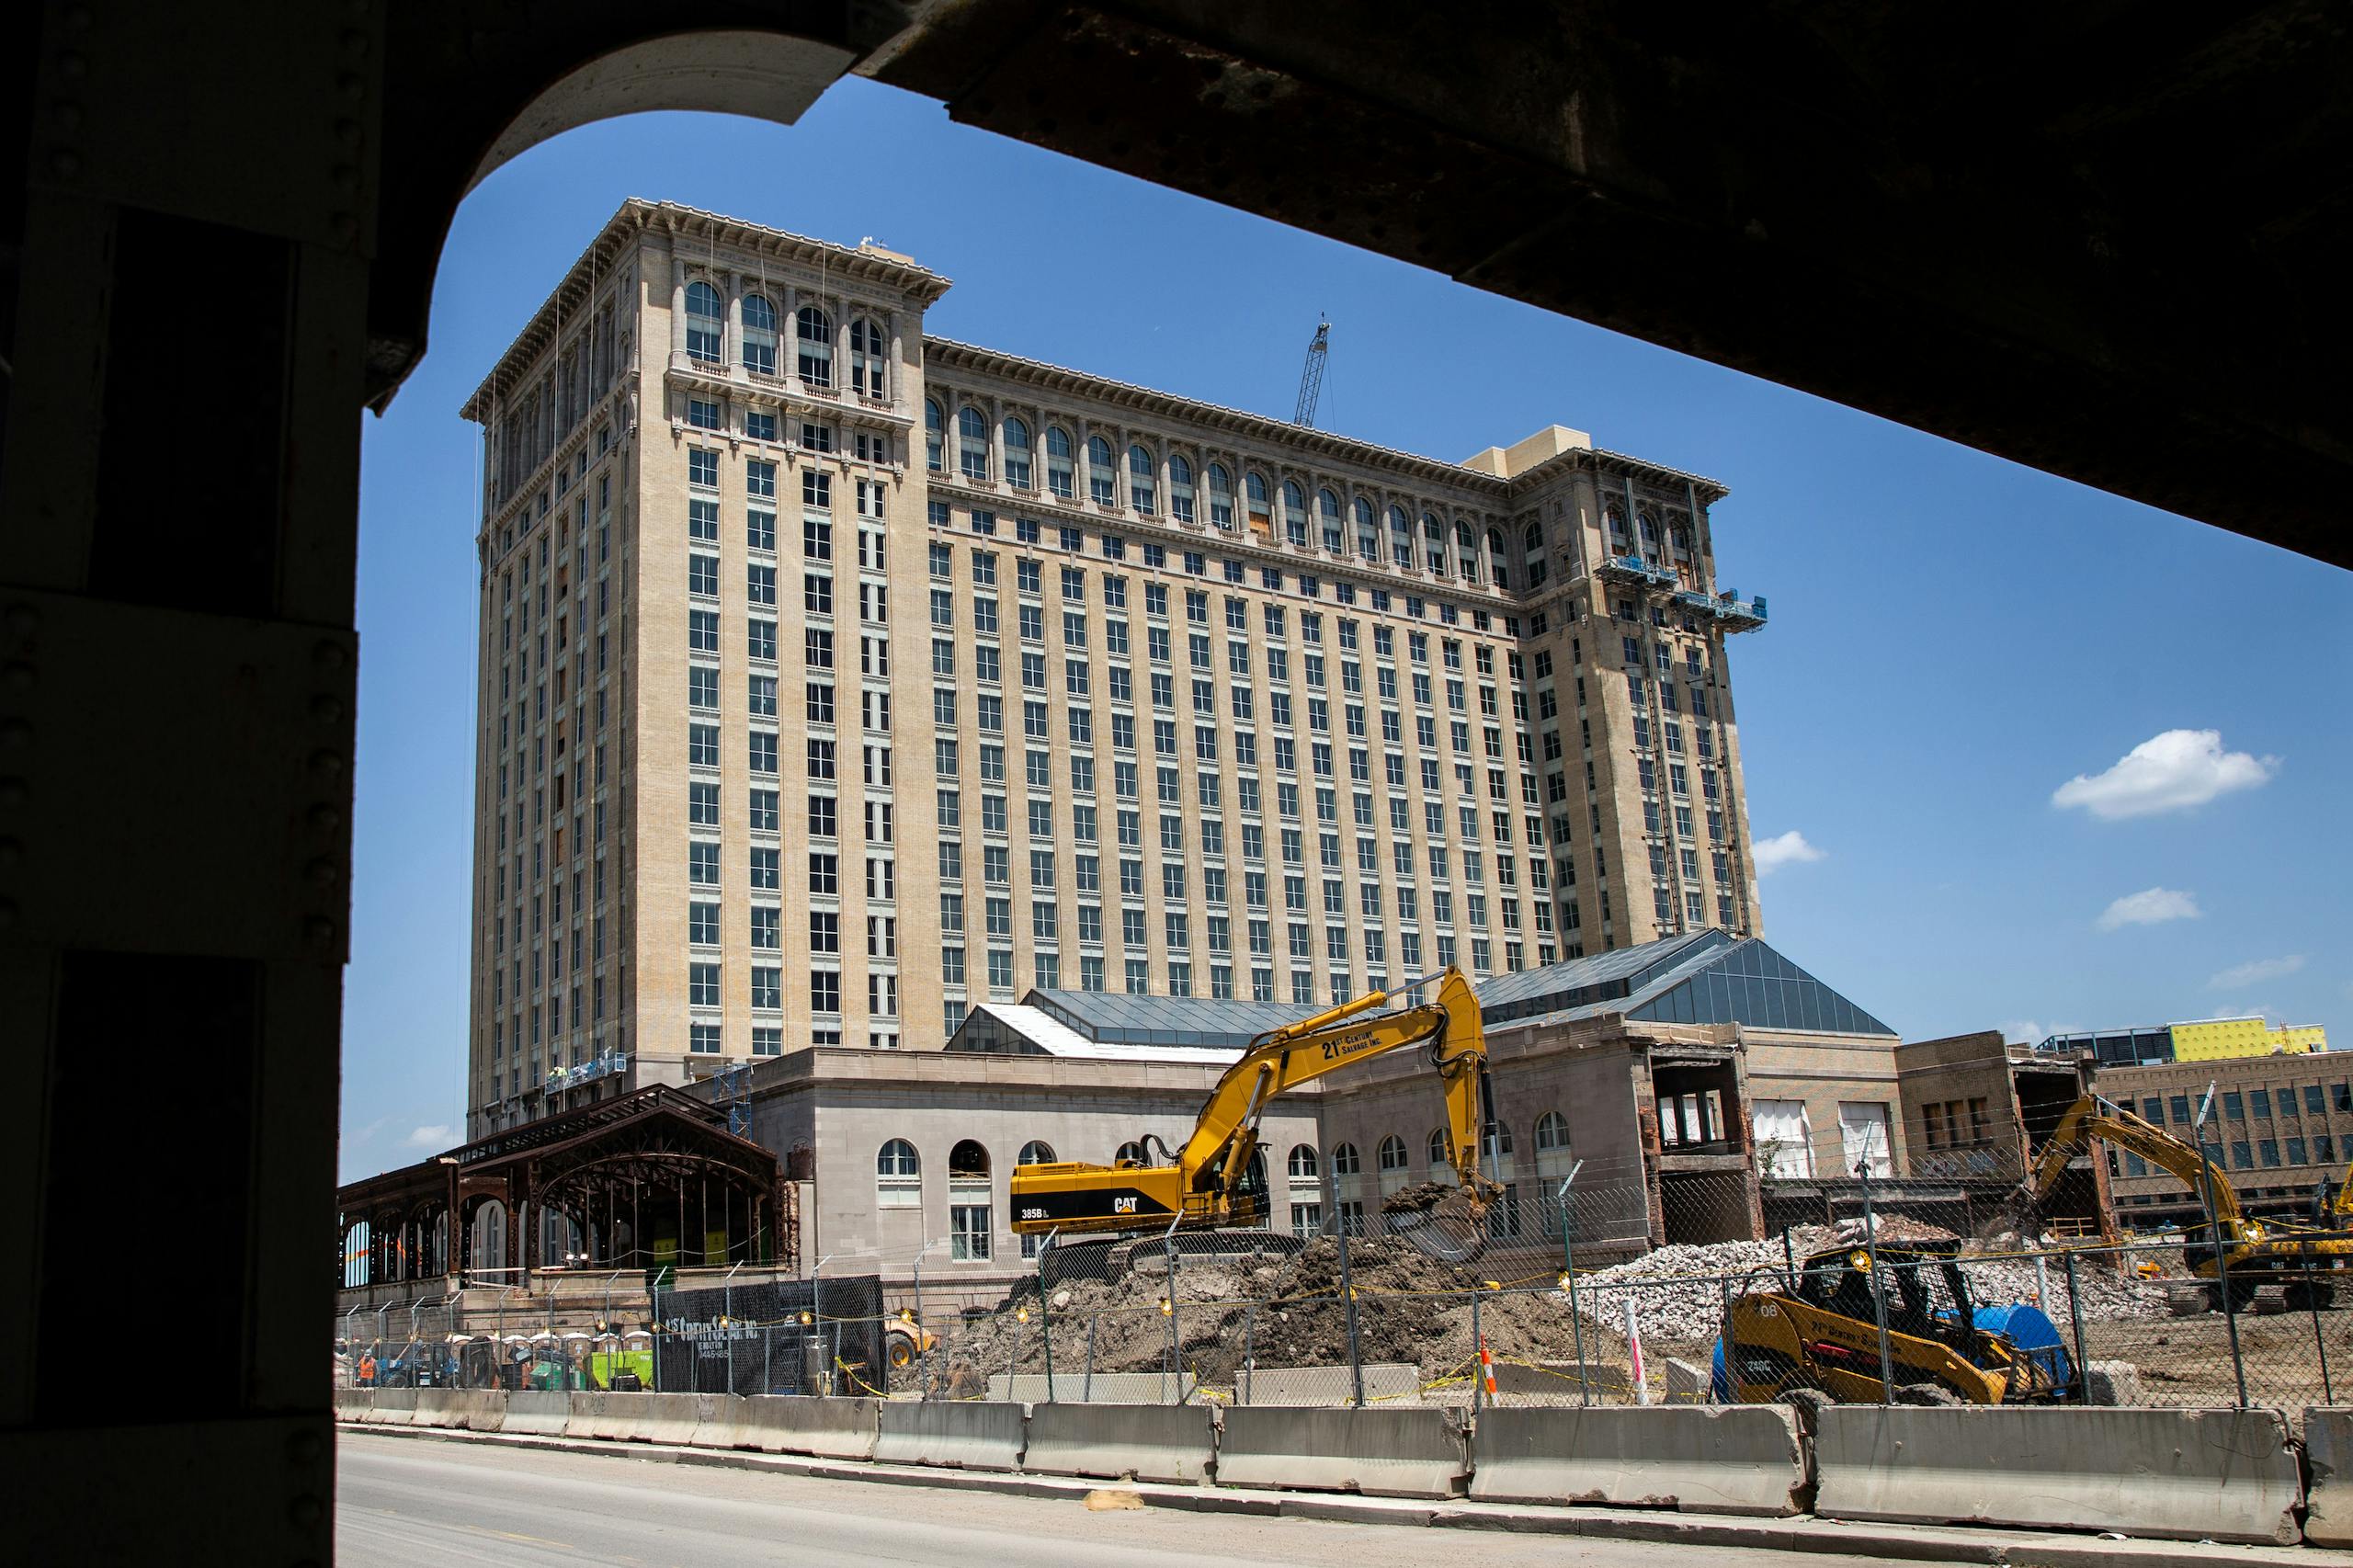 Michigan central station today